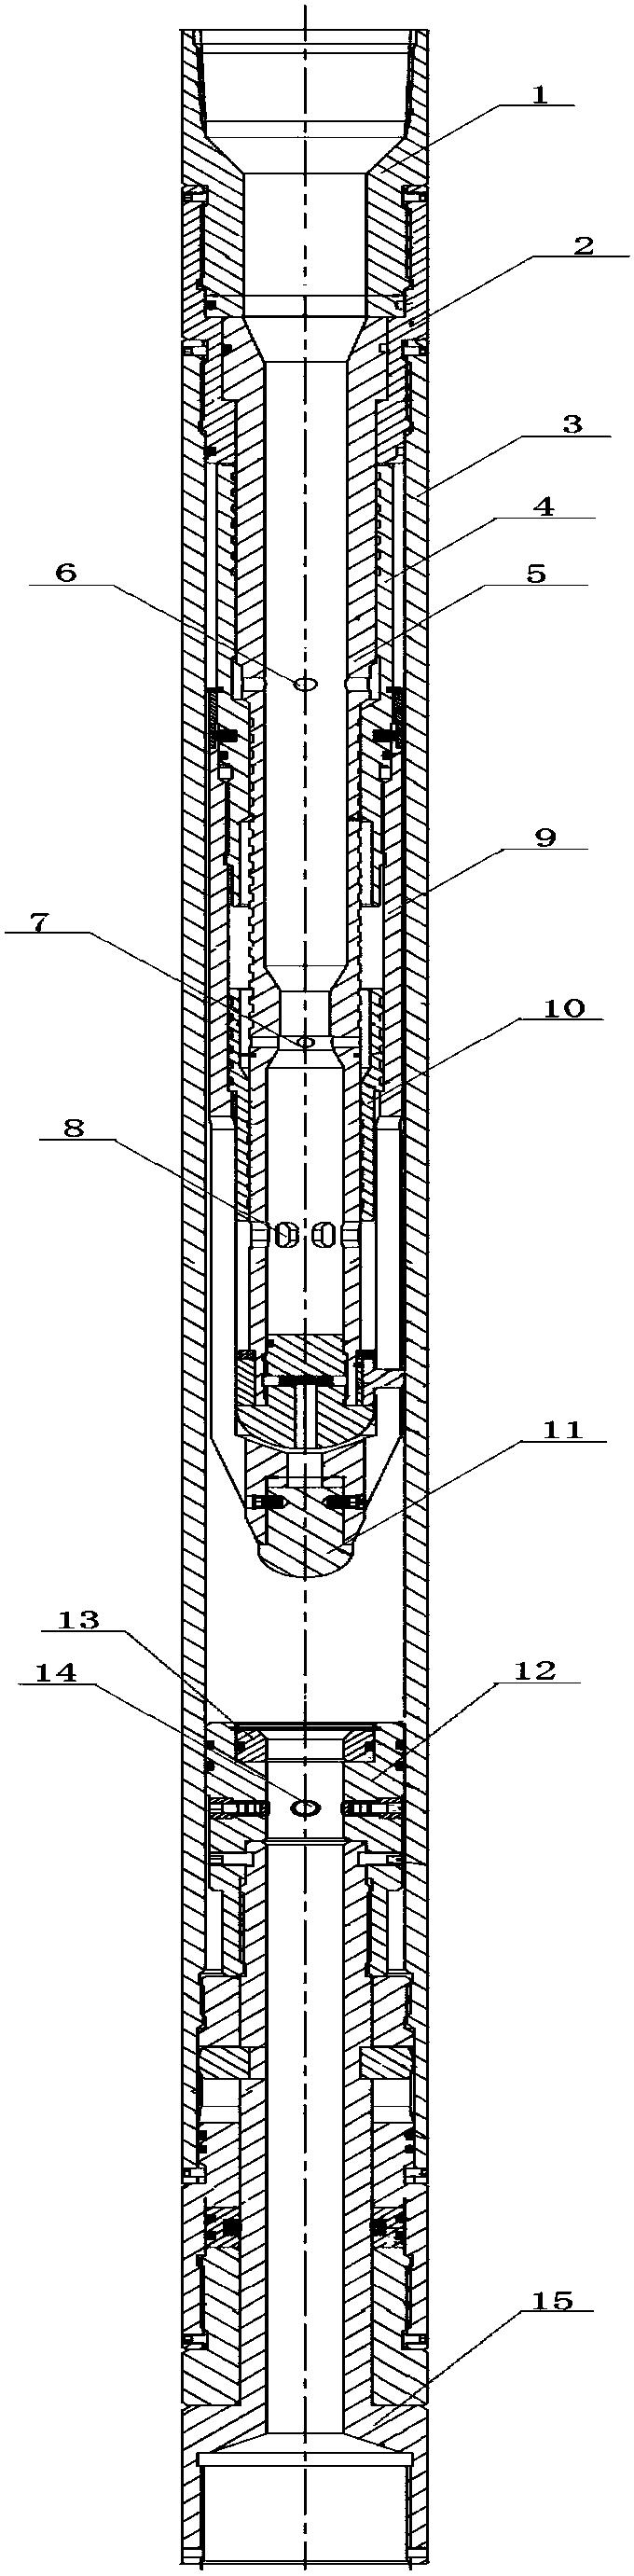 An oil and gas well downhole hydraulic hammer